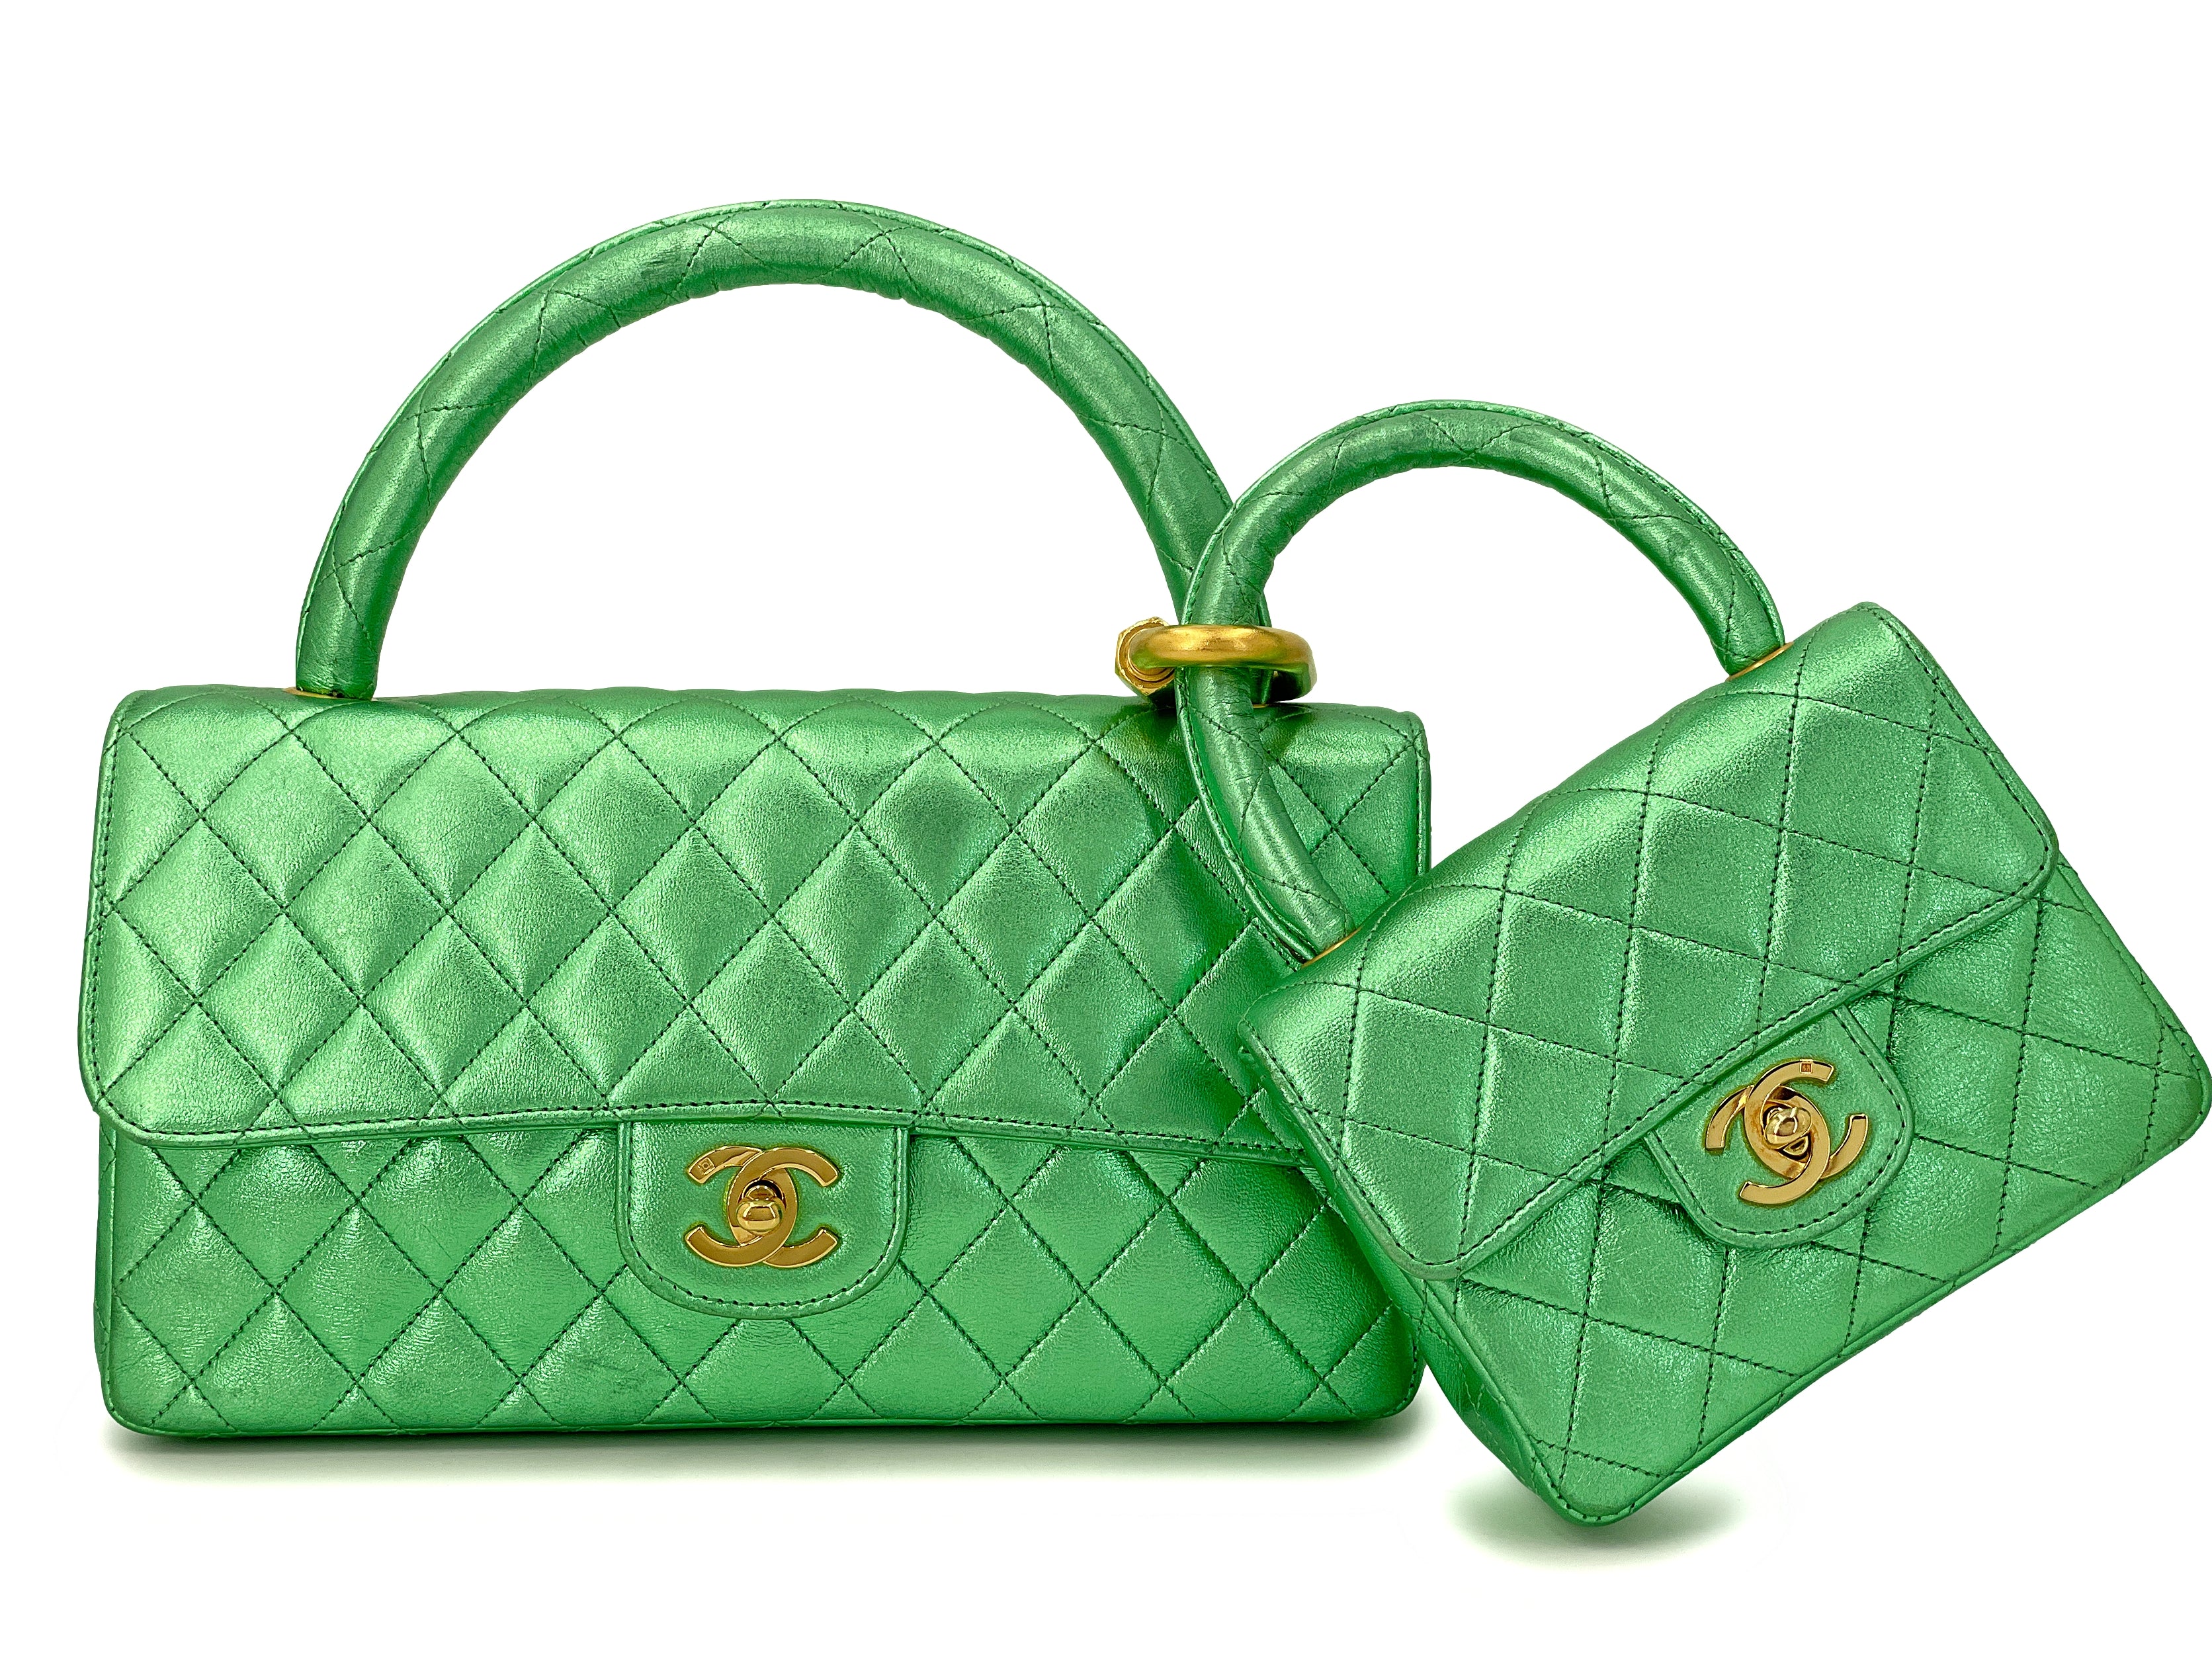 What is the quality of handbags from the British luxury house, Launer, as  compared to bags from classical luxury houses such as Louis Vuitton, Chanel  and Hermes? - Quora